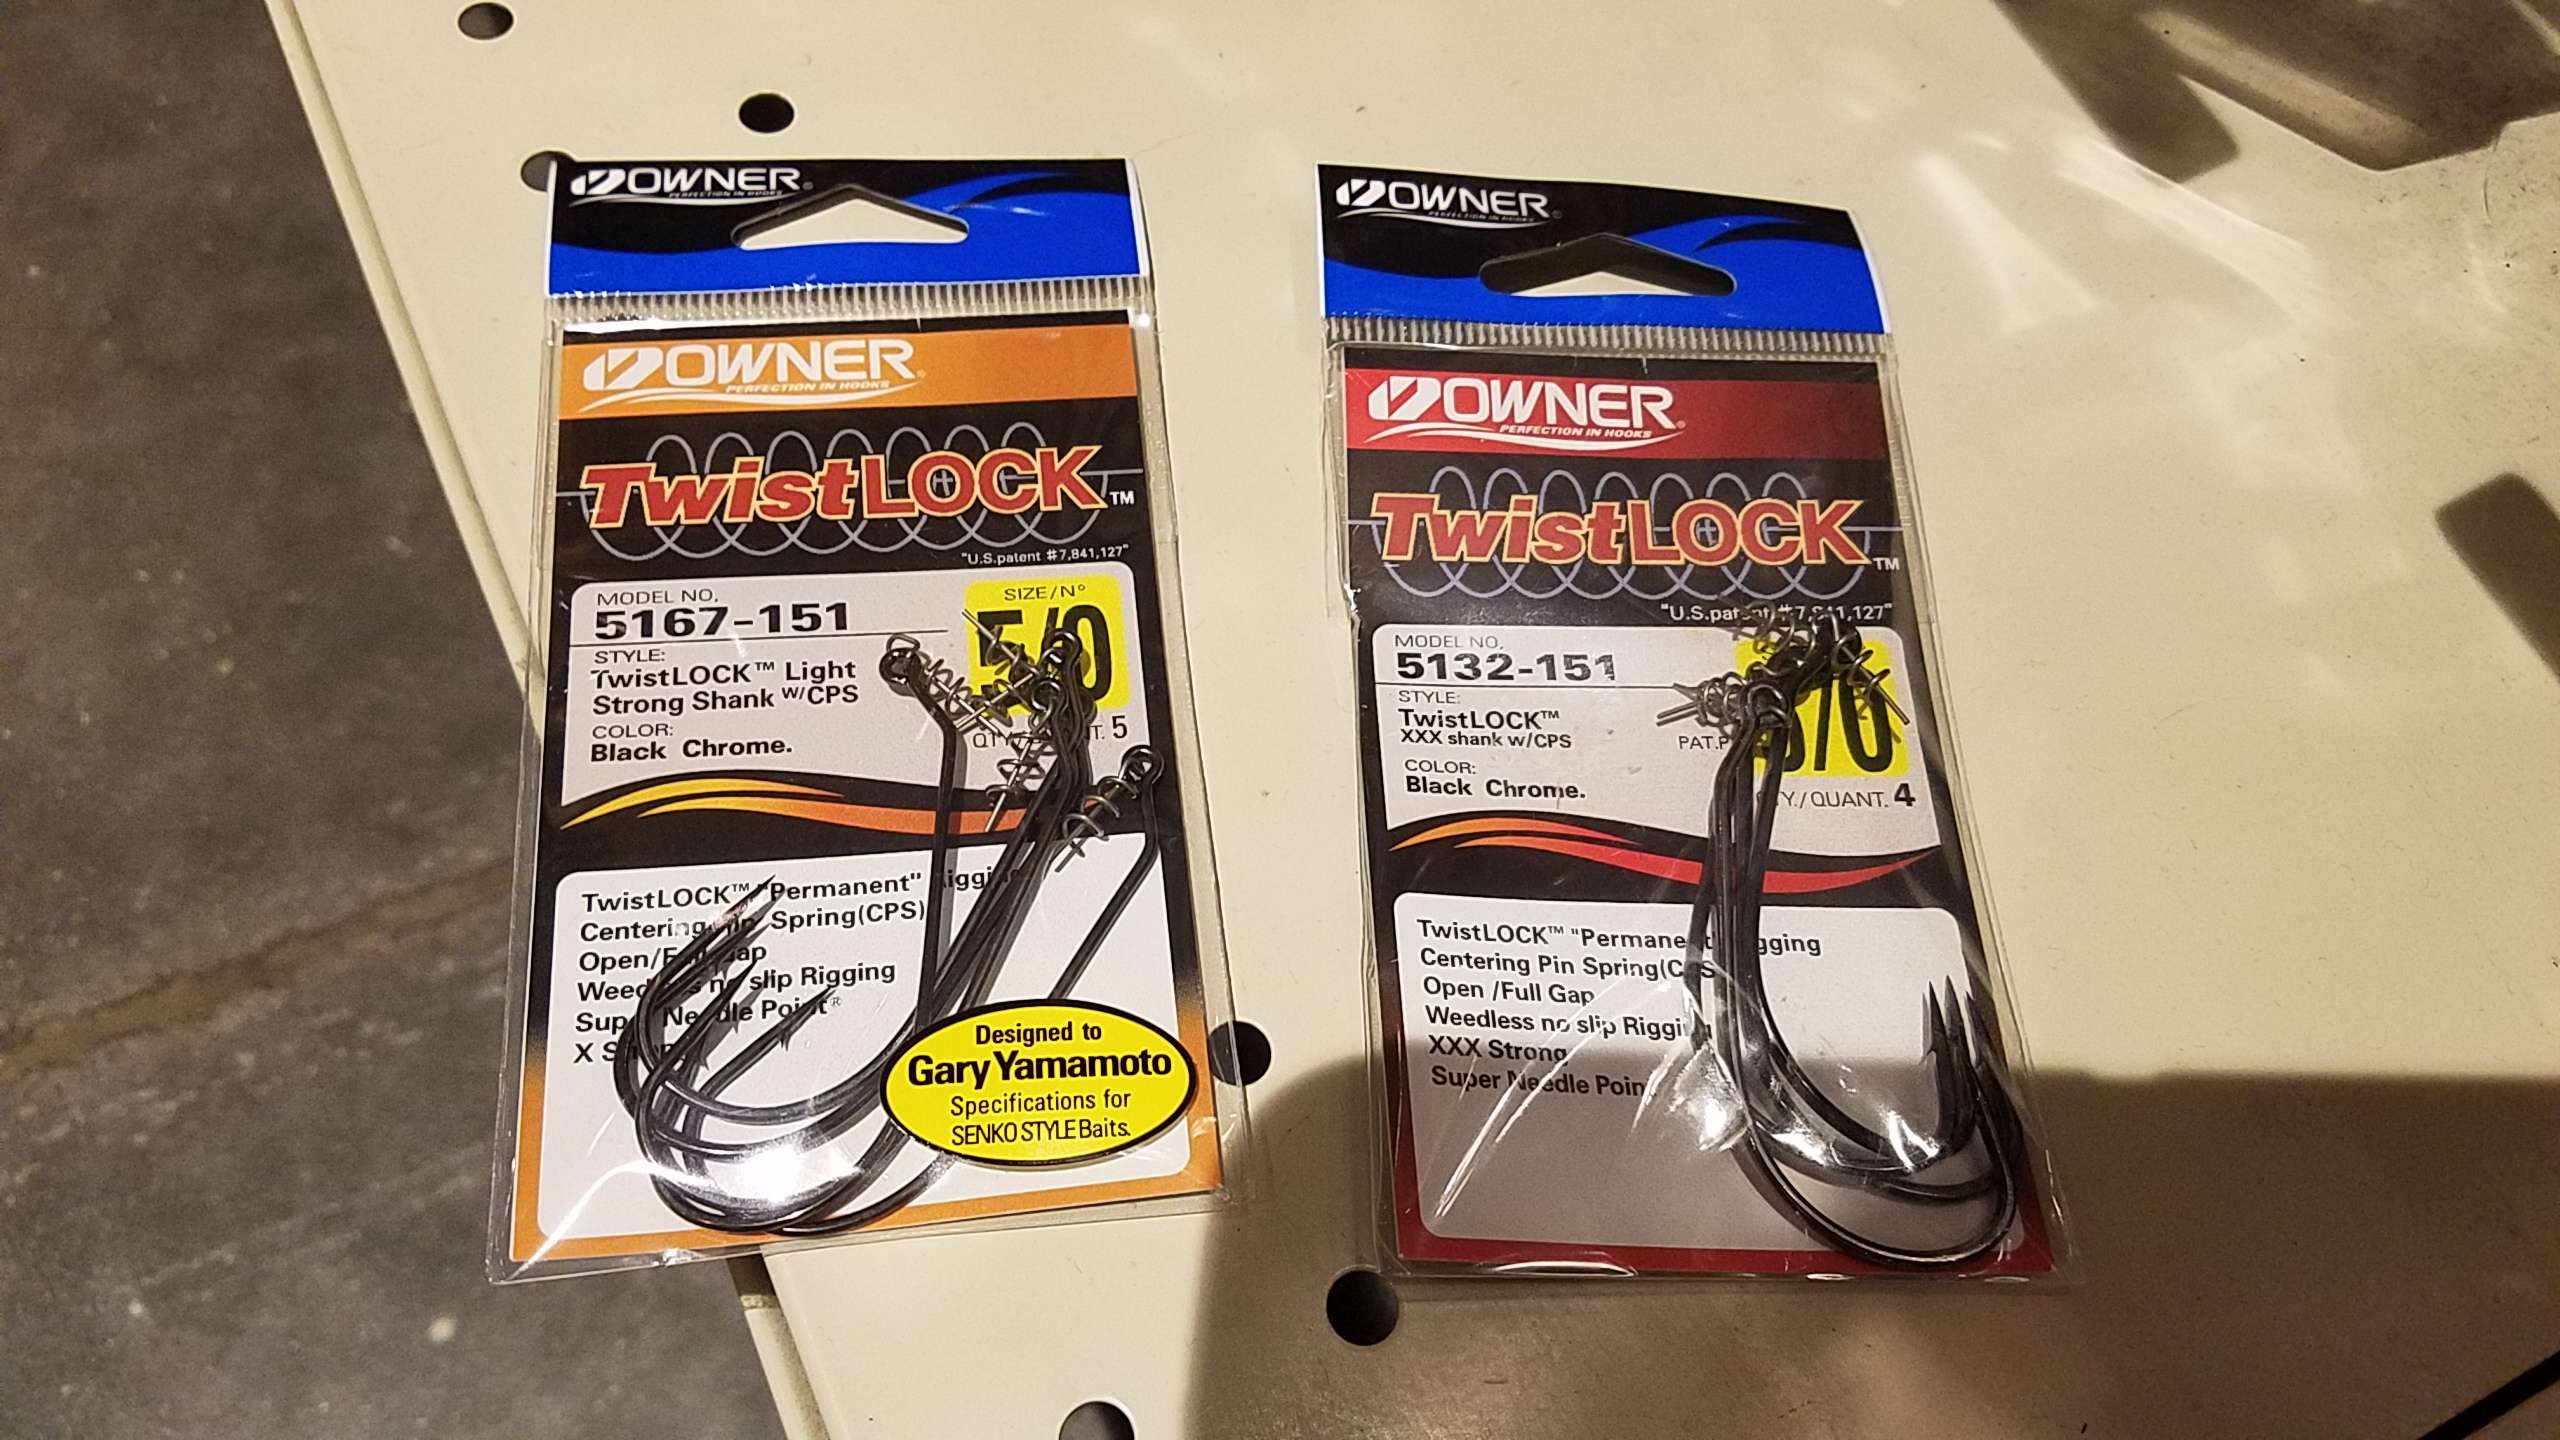 2 PACKS OF OWNER TWISTLOCK LIGHT STRON SHANK W/CPS SIZE 2/0 5 PER PACK 5167-121